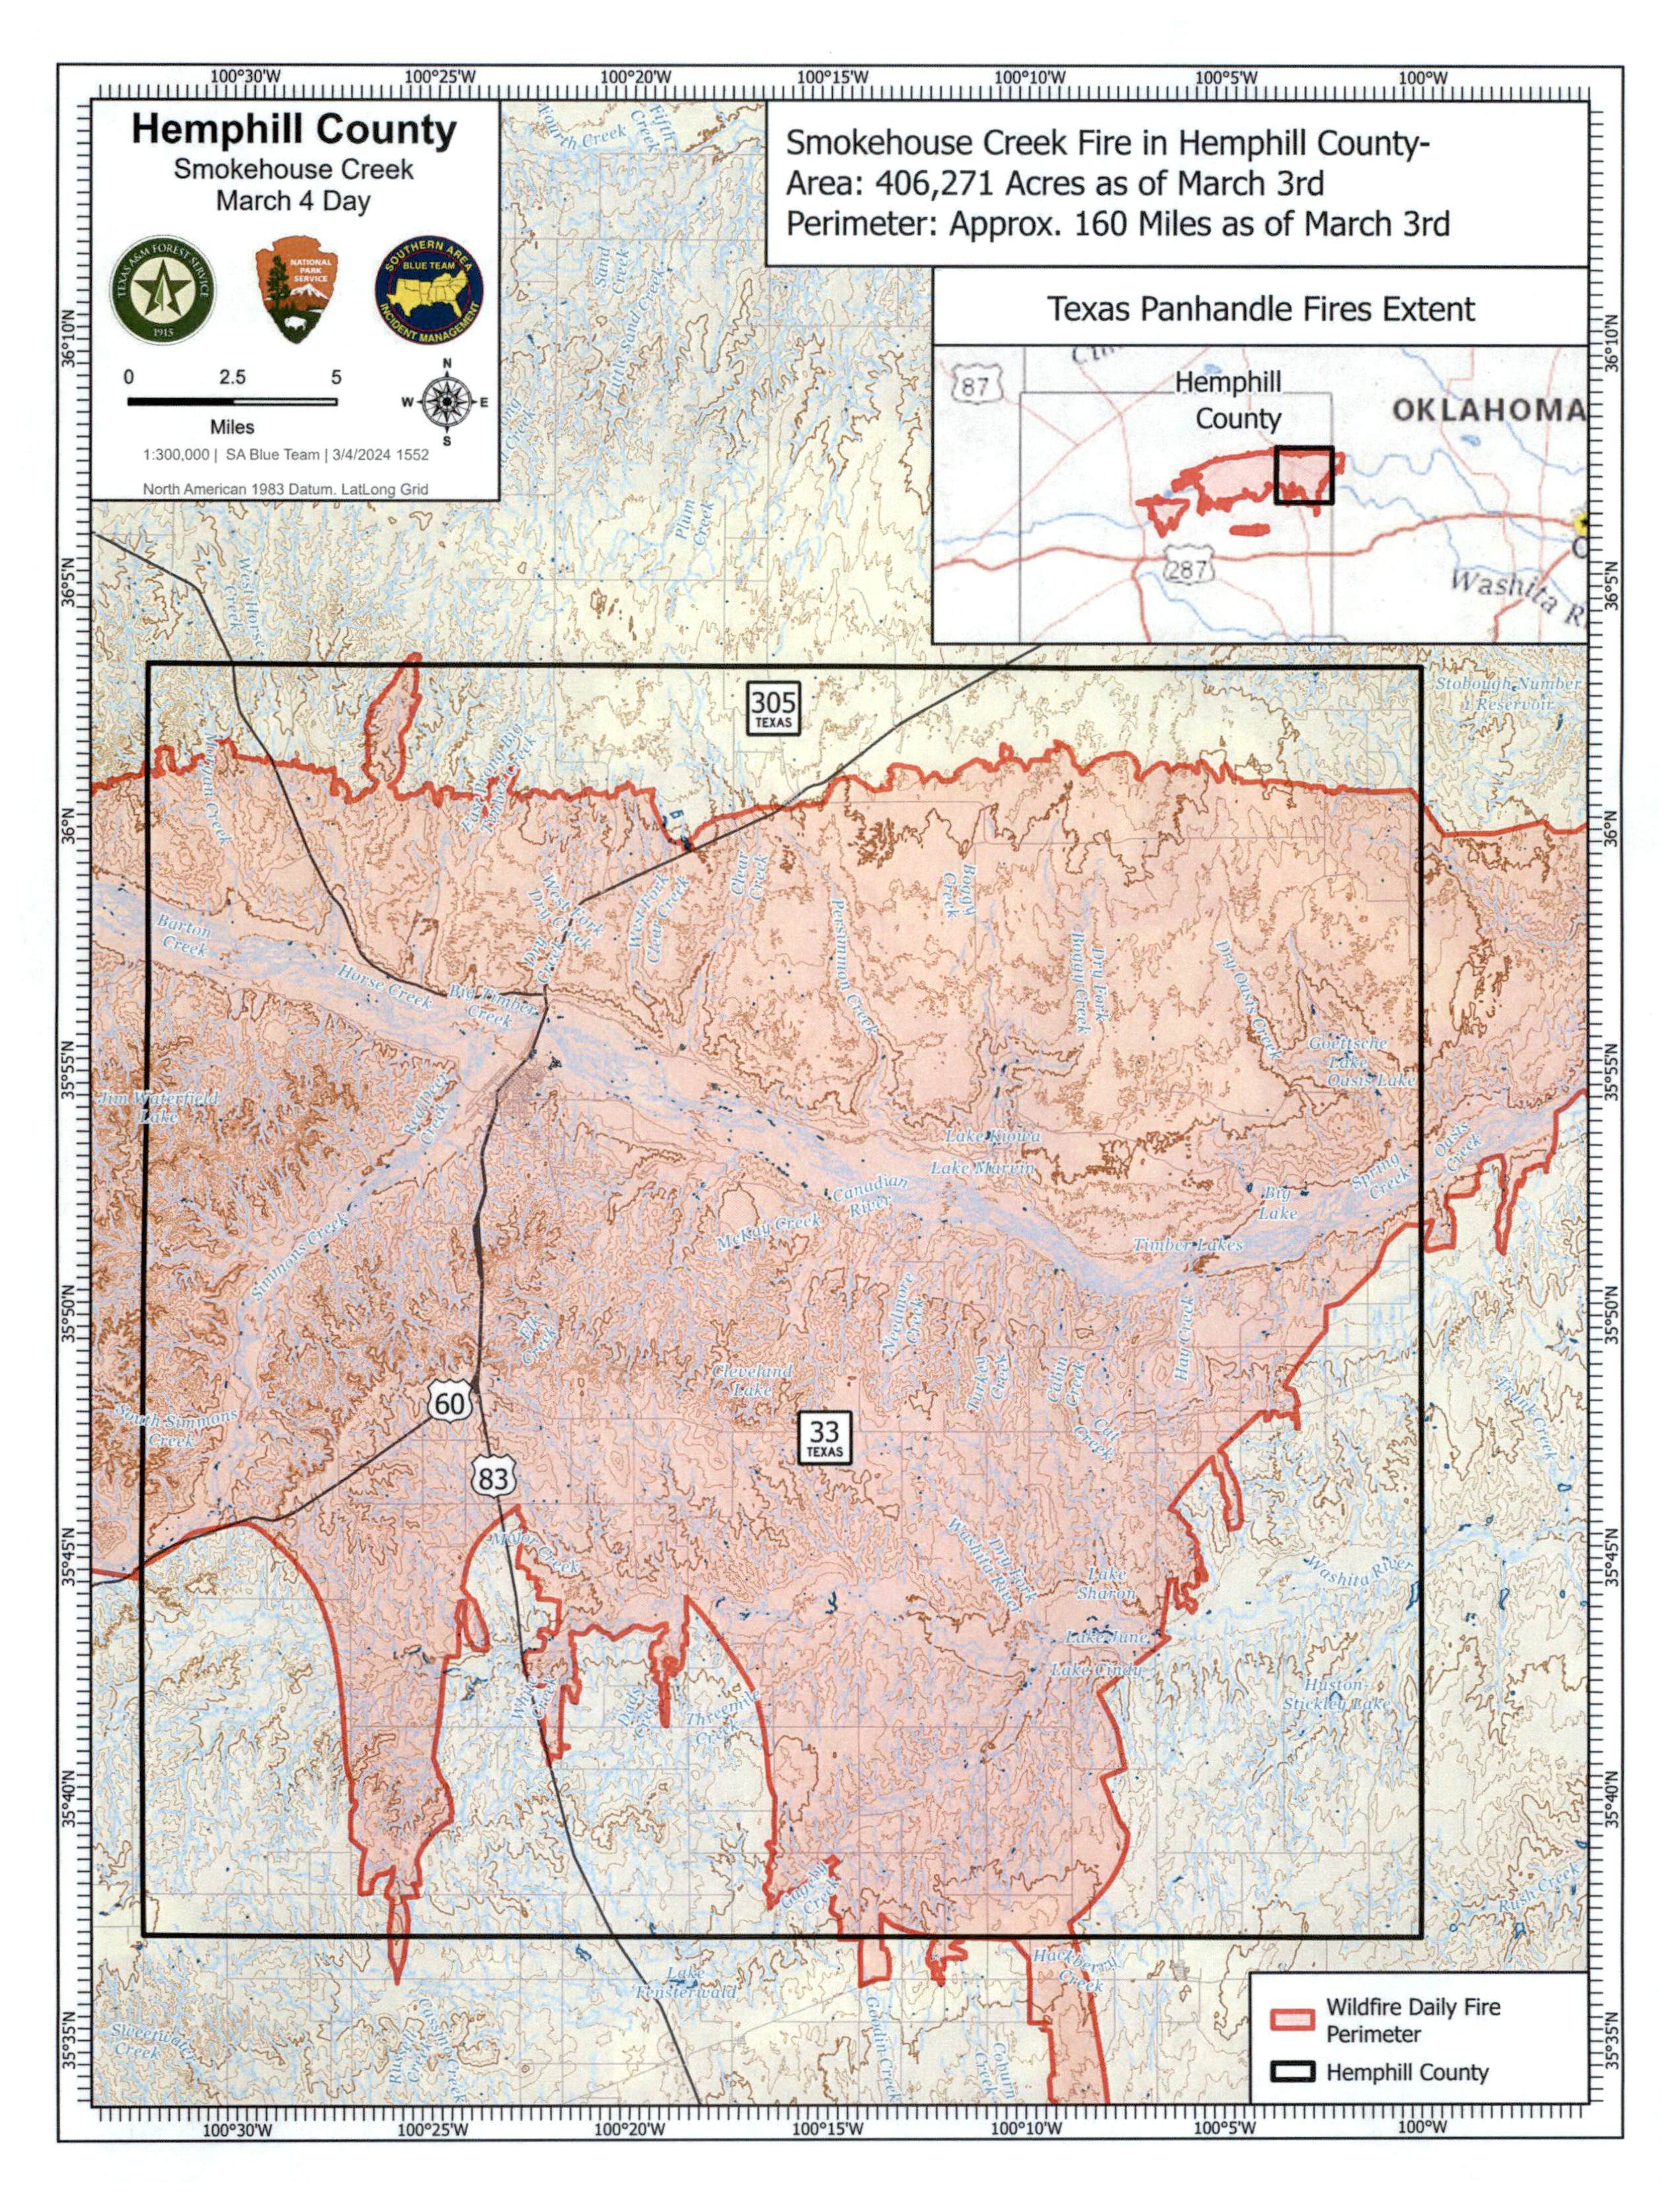 Map of the Smokehouse Creek Fire in Hemphill County as of March 3